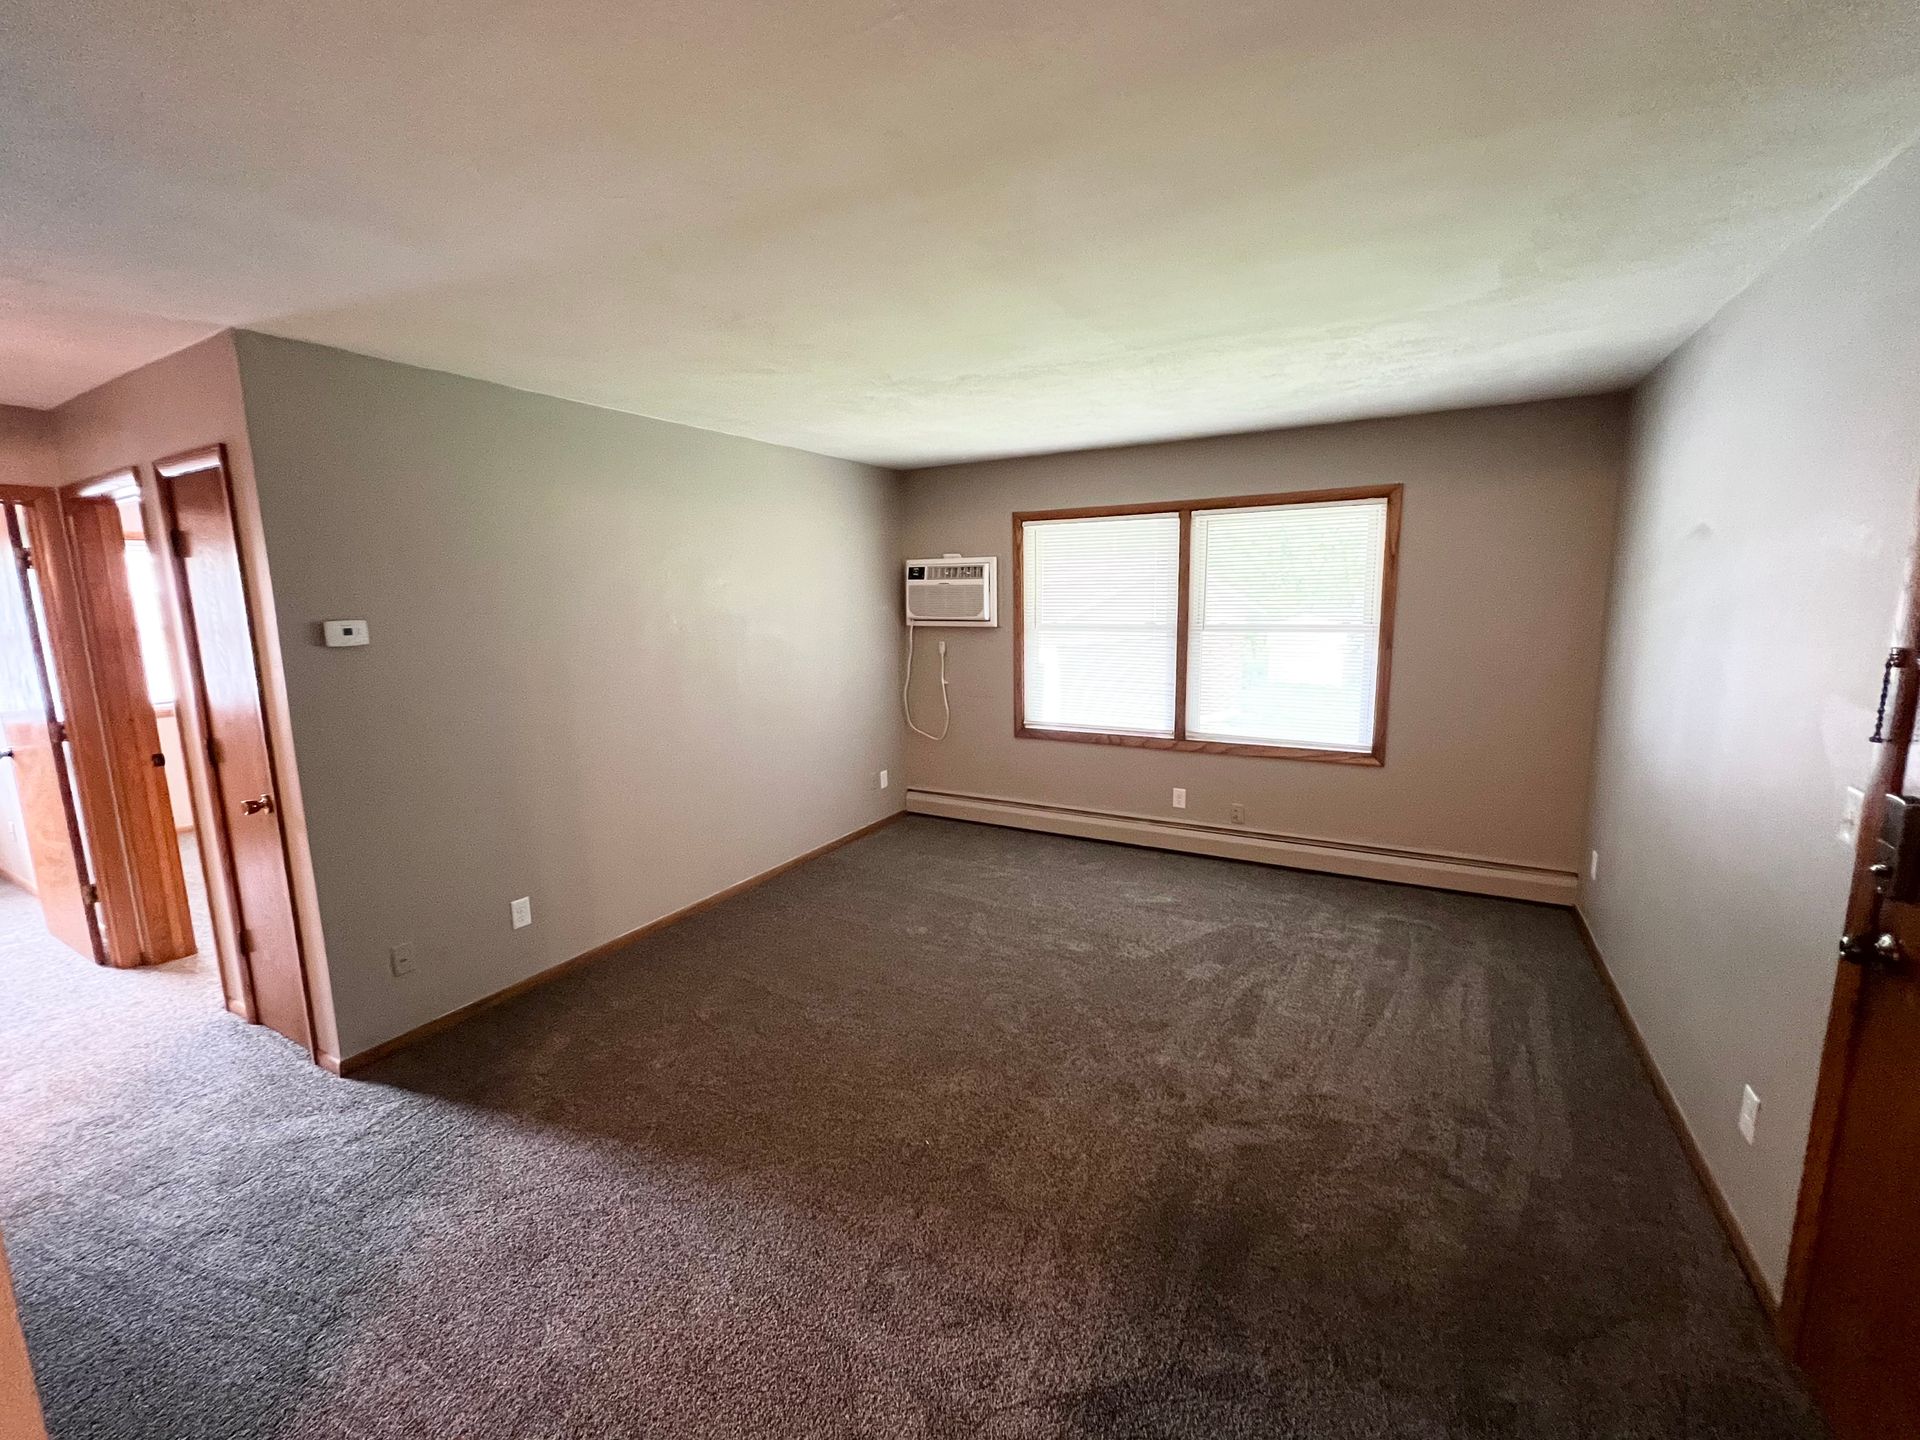 An empty living room with a window and air conditioner.